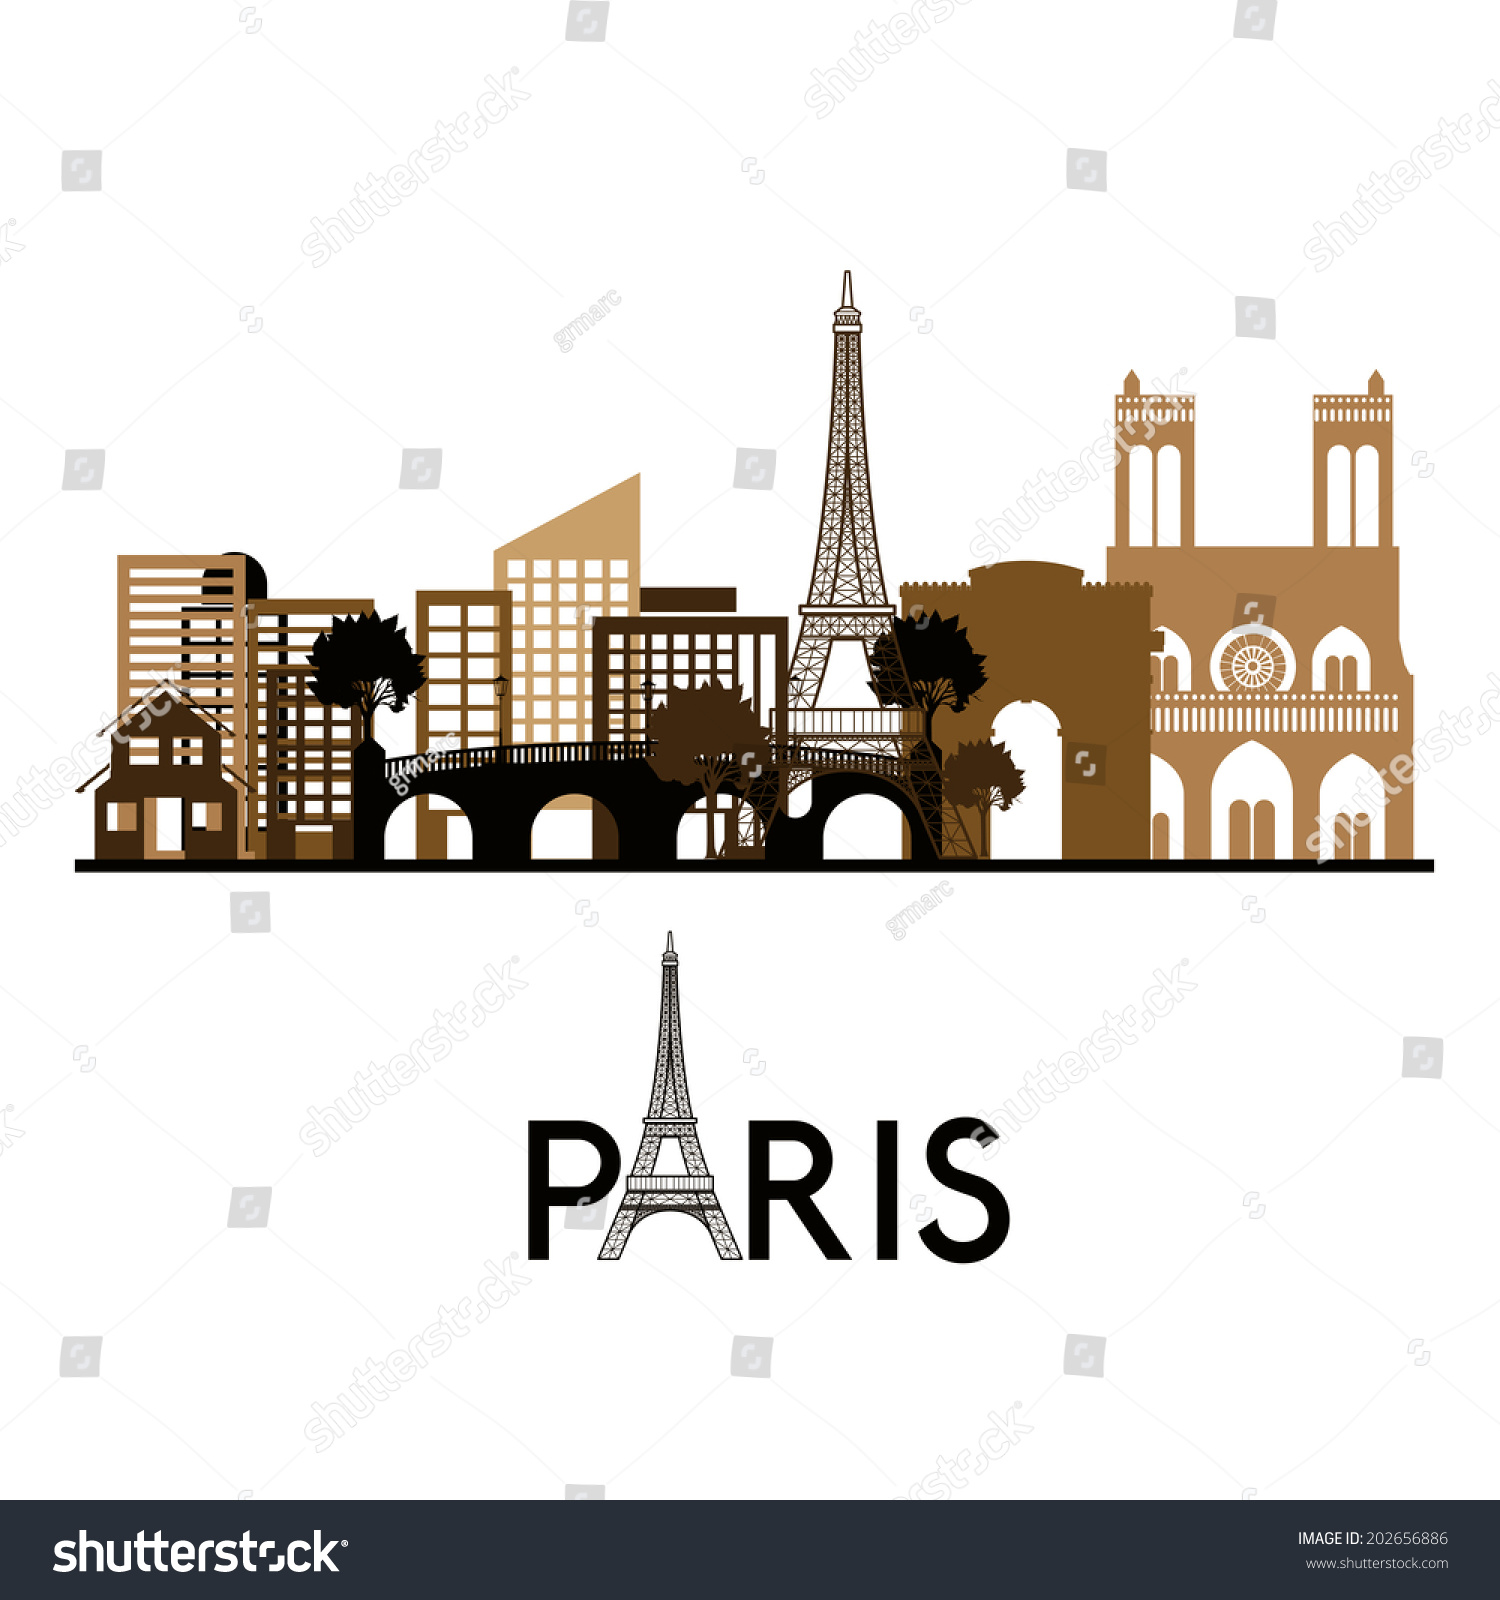 Paris Design Over White Background Vector Stock Vector (Royalty Free ...